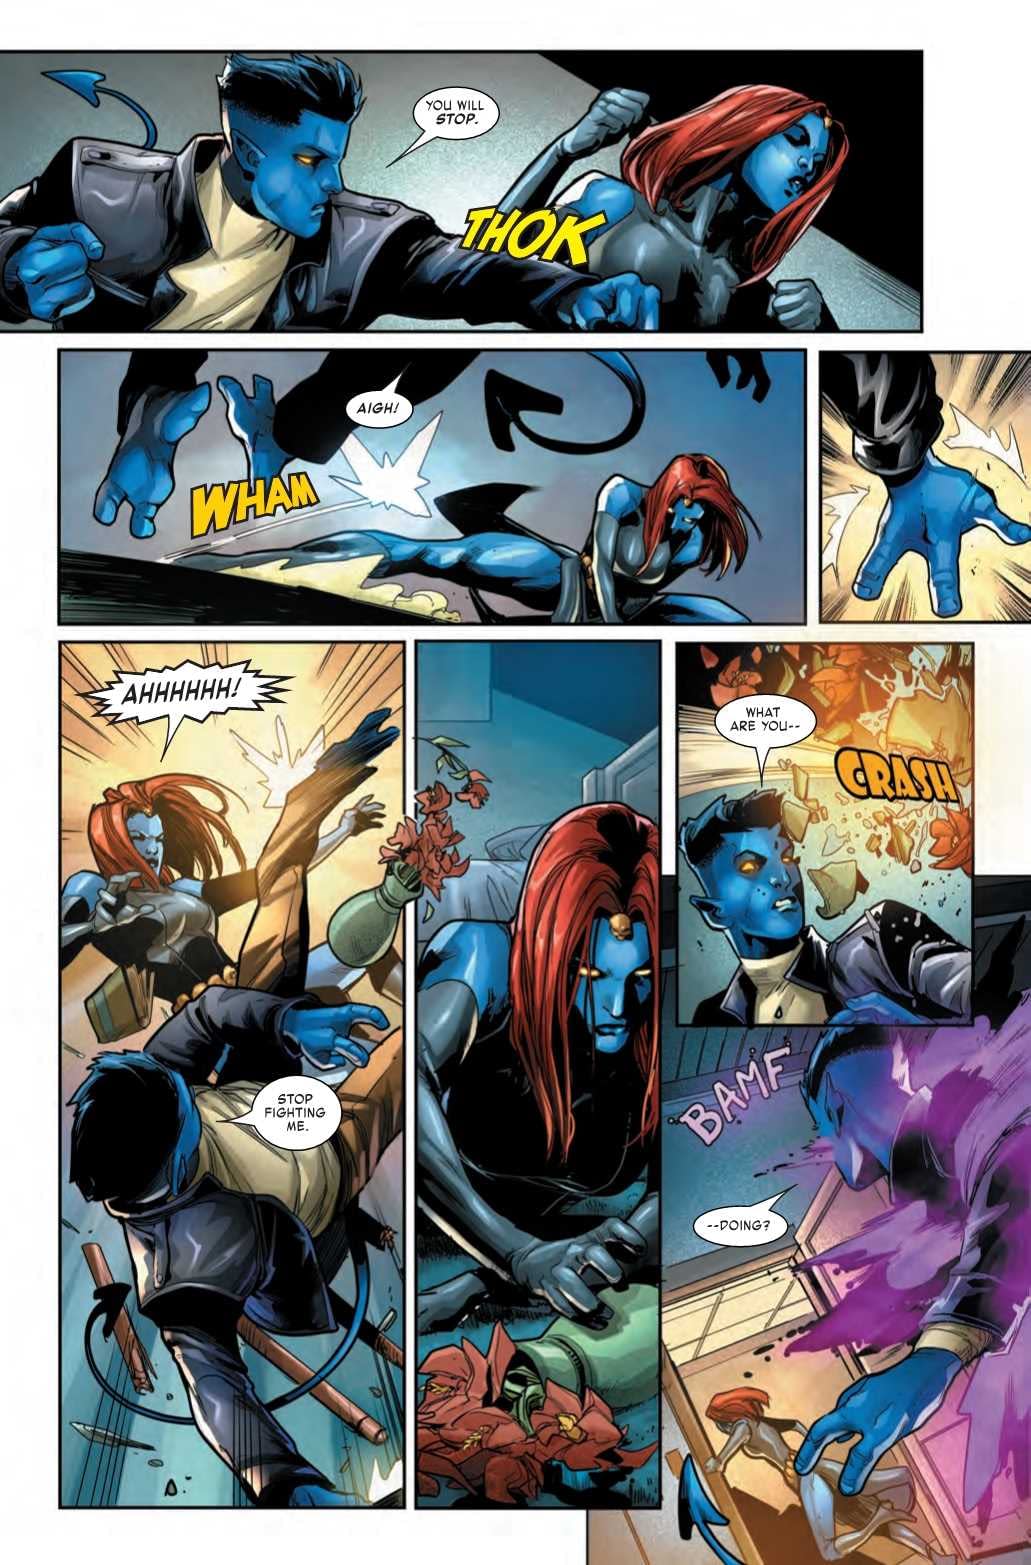 Who Wins in a Fight, Nightcrawler or Mystique? Amazing Nightcrawler #3 Preview